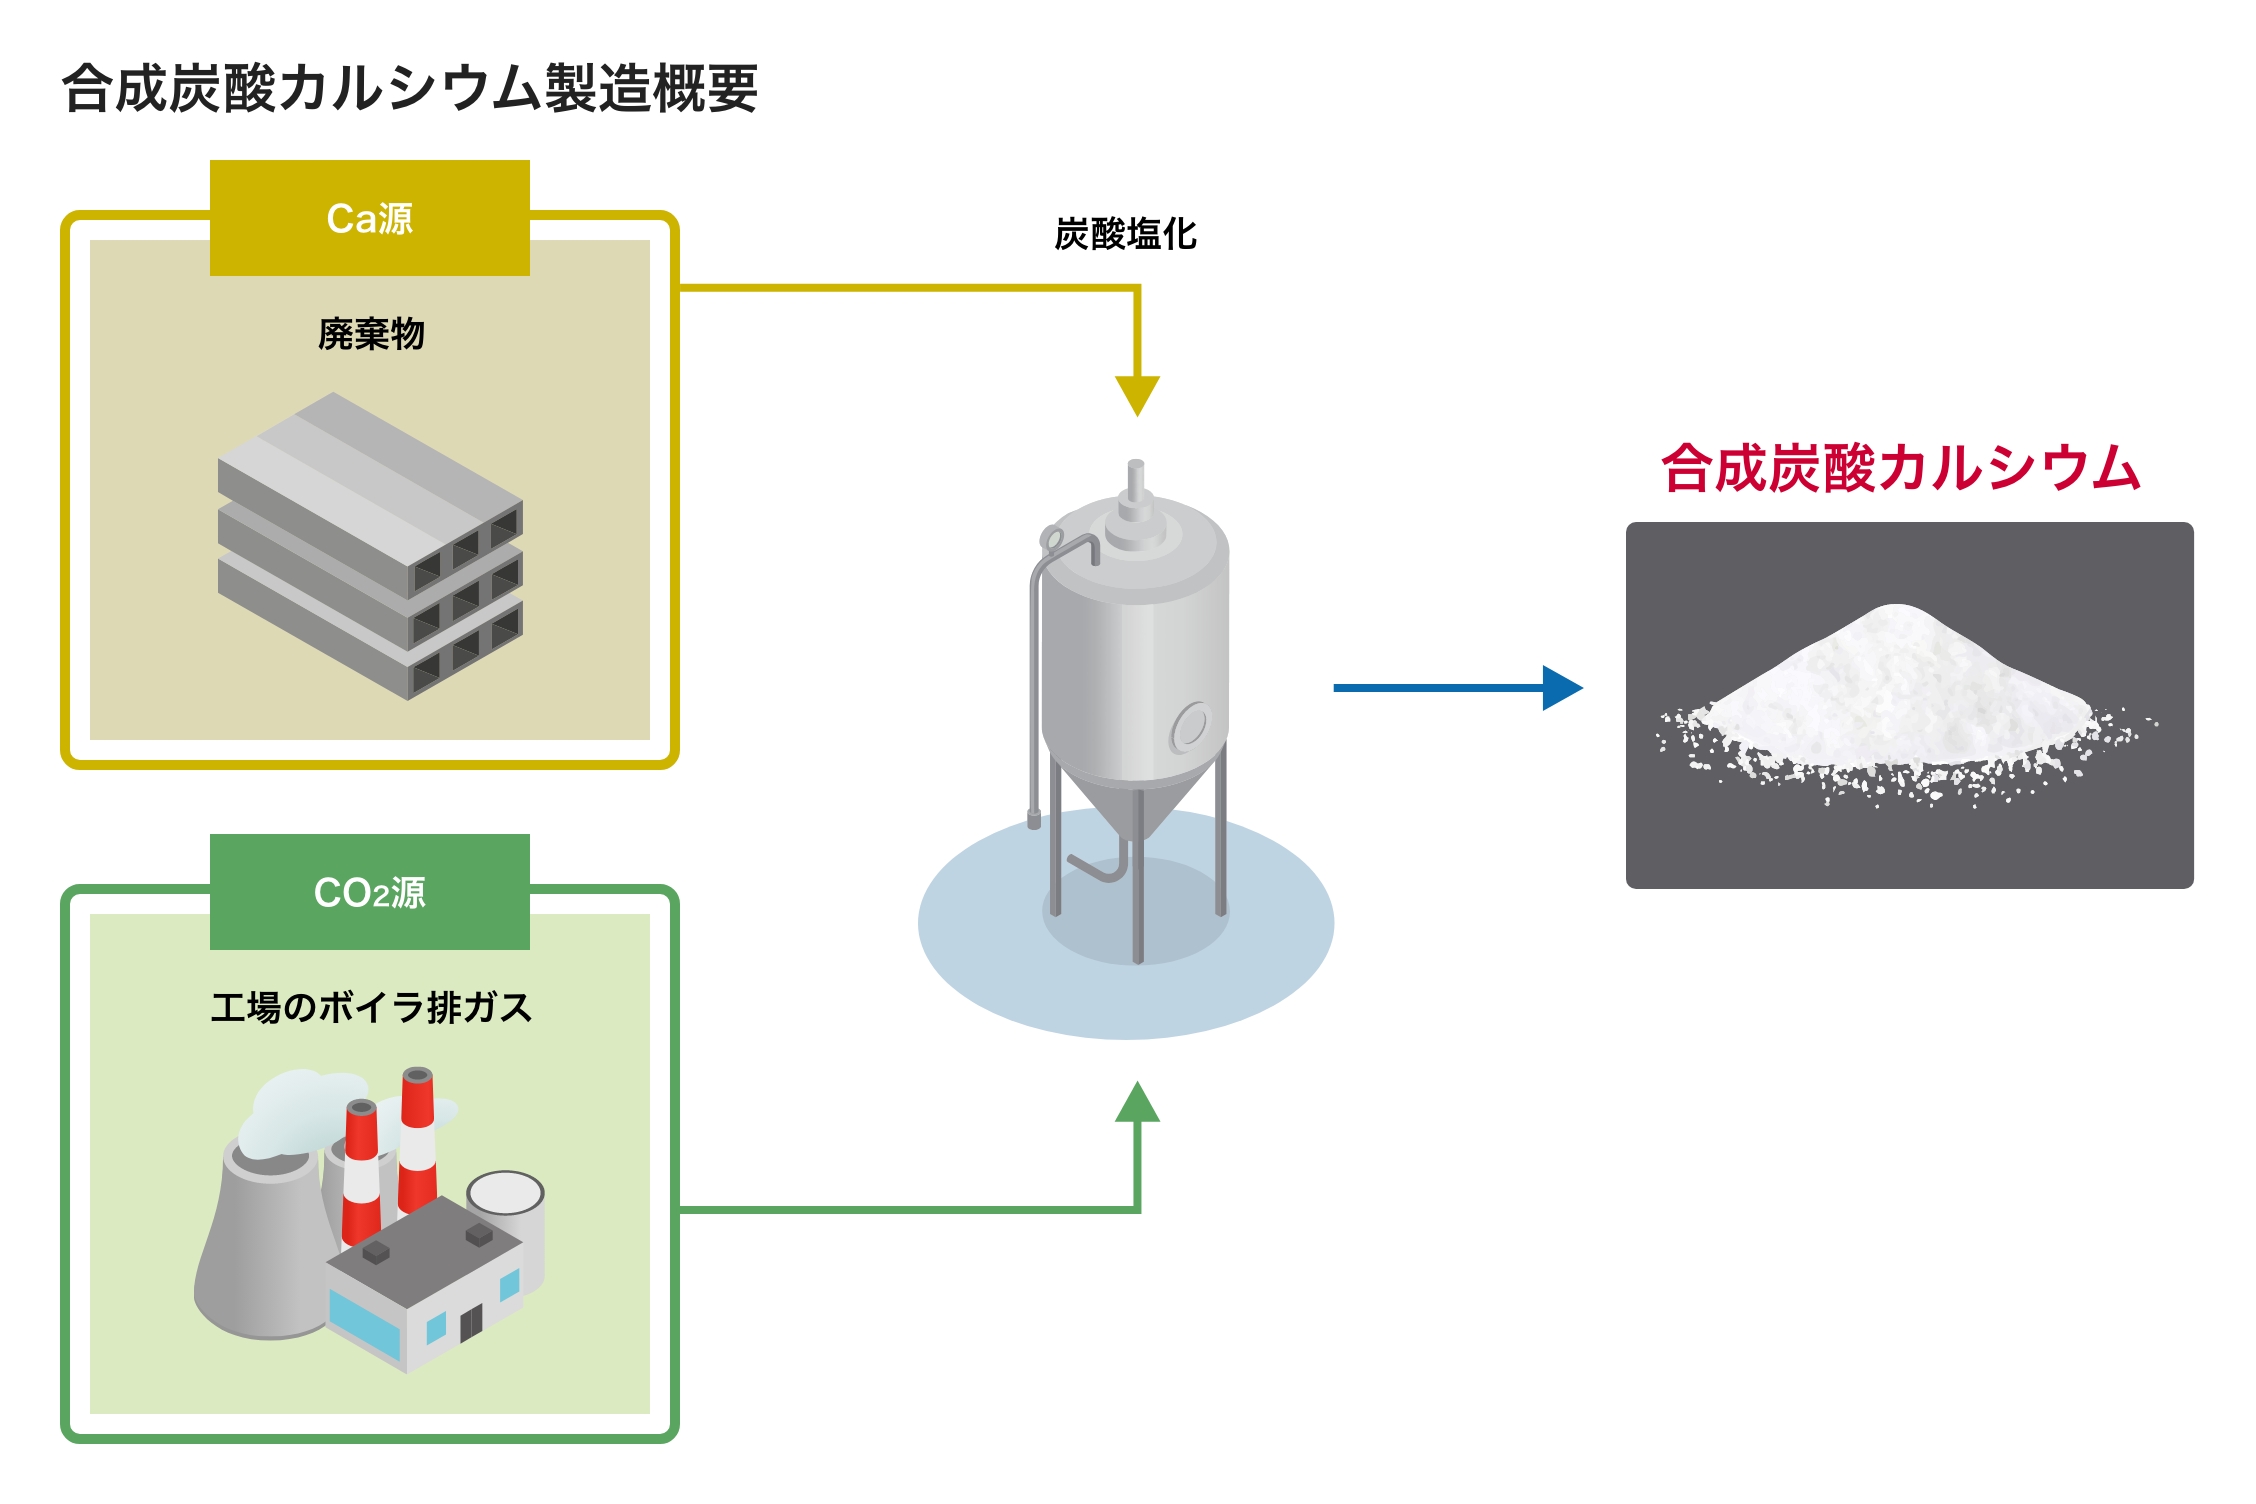 Development of carbon recycling technology